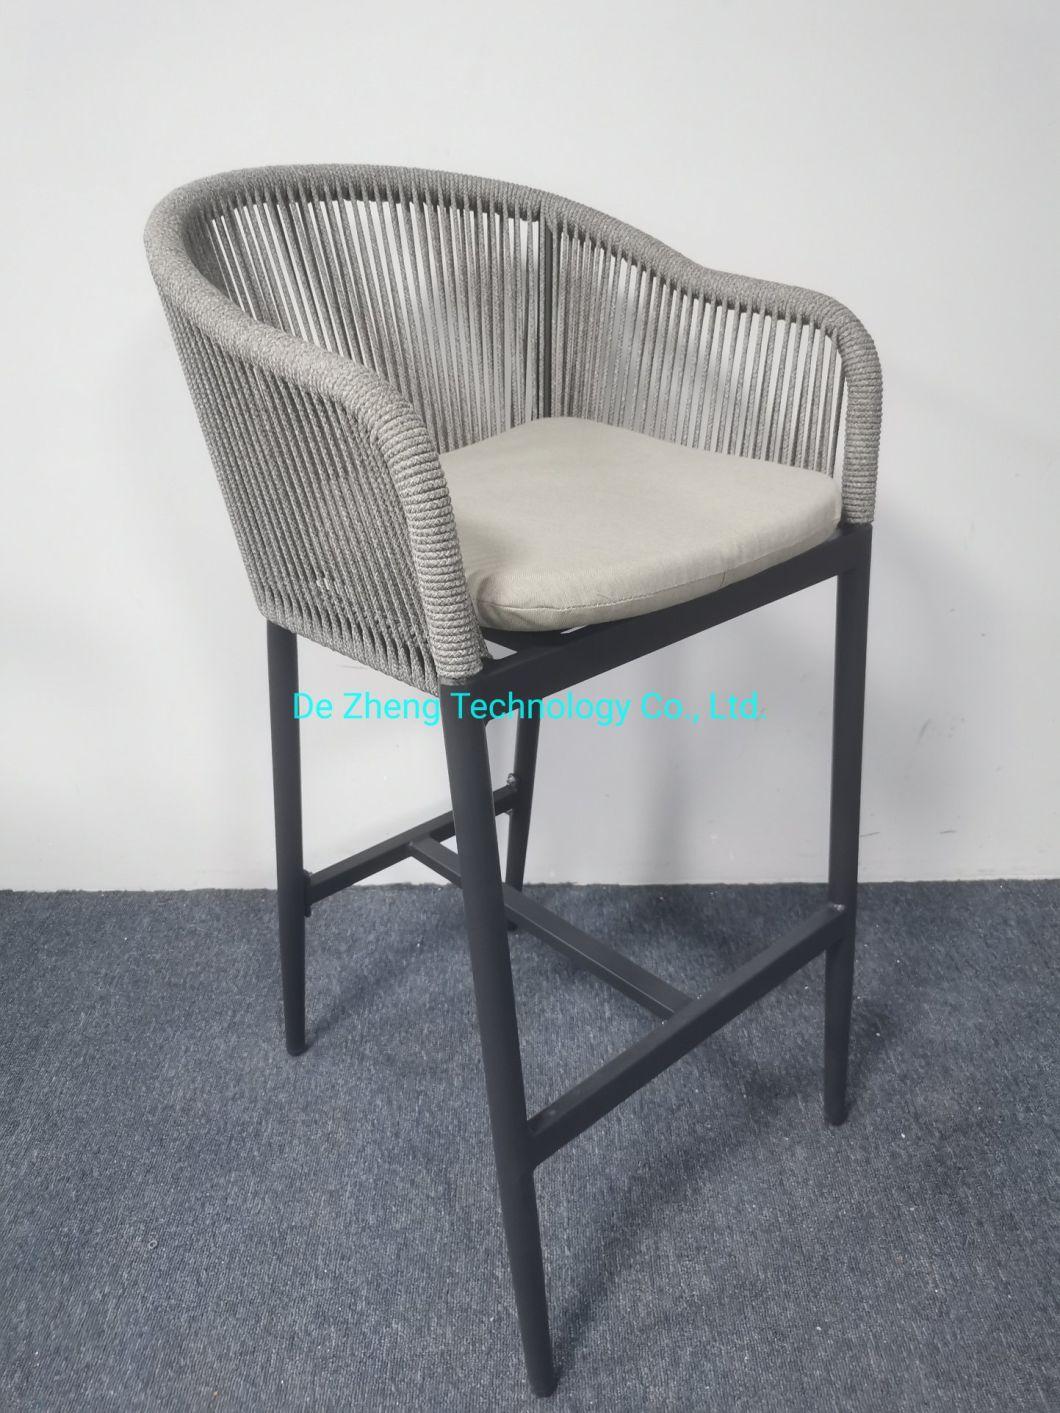 Kitchen Bar Chairs Standing Stool Chairs Commercial Luxury Design Modern Leisure European Style Bar Stool Chair